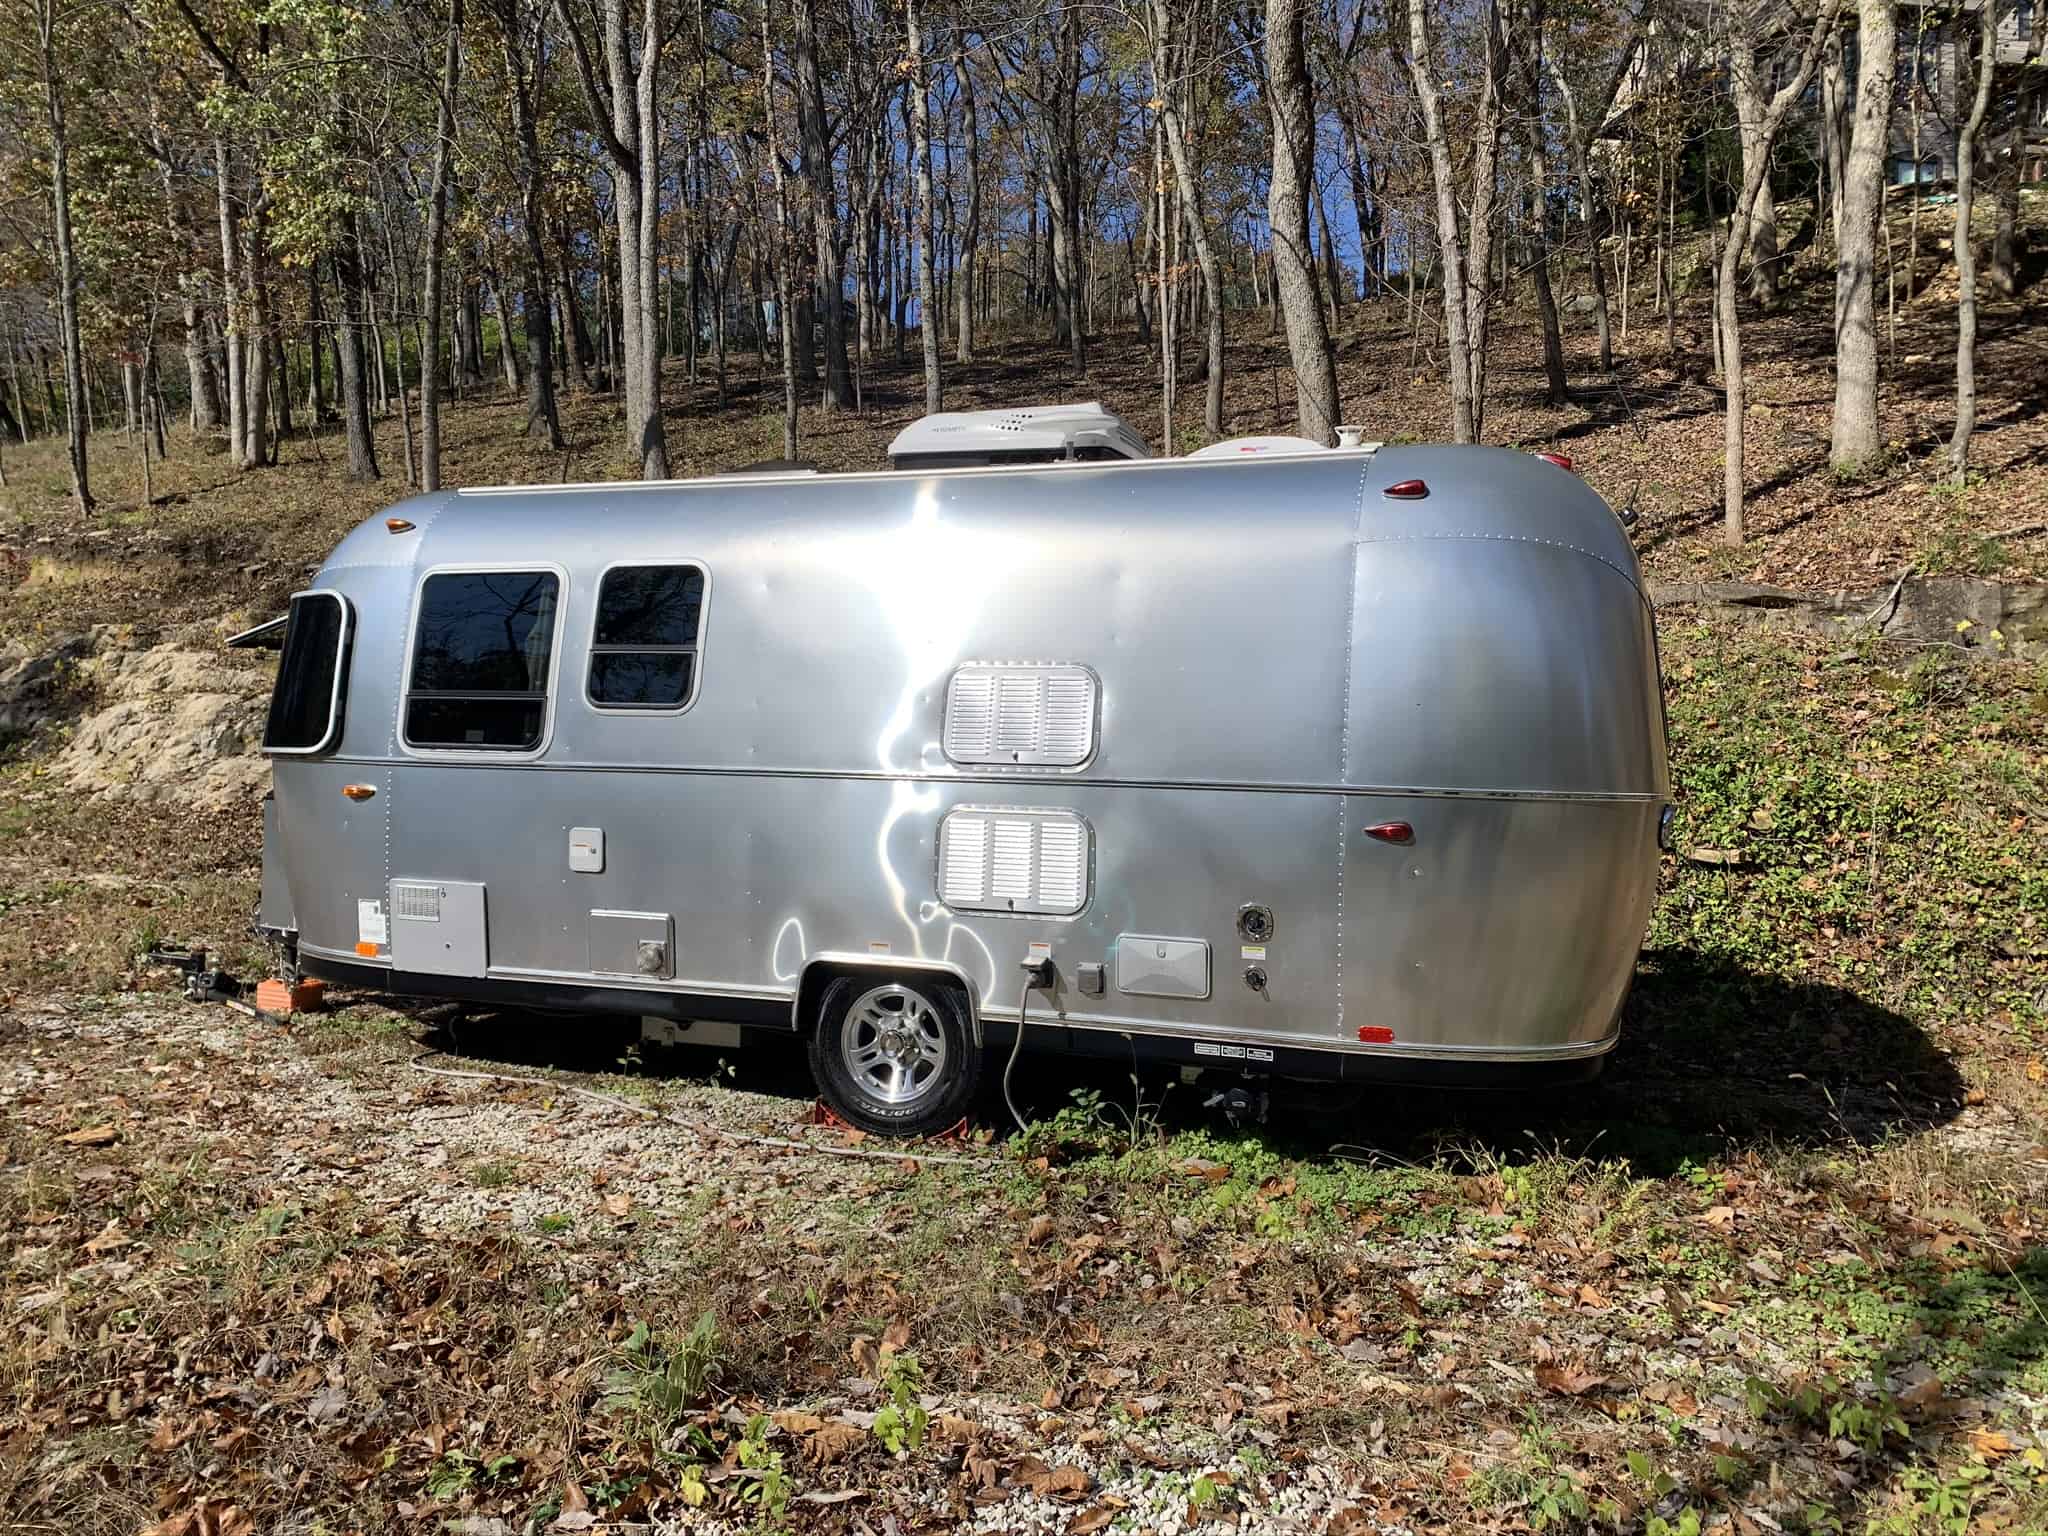 2019 Airstream 22FT Sport For Sale in St. Louis - Airstream Marketplace